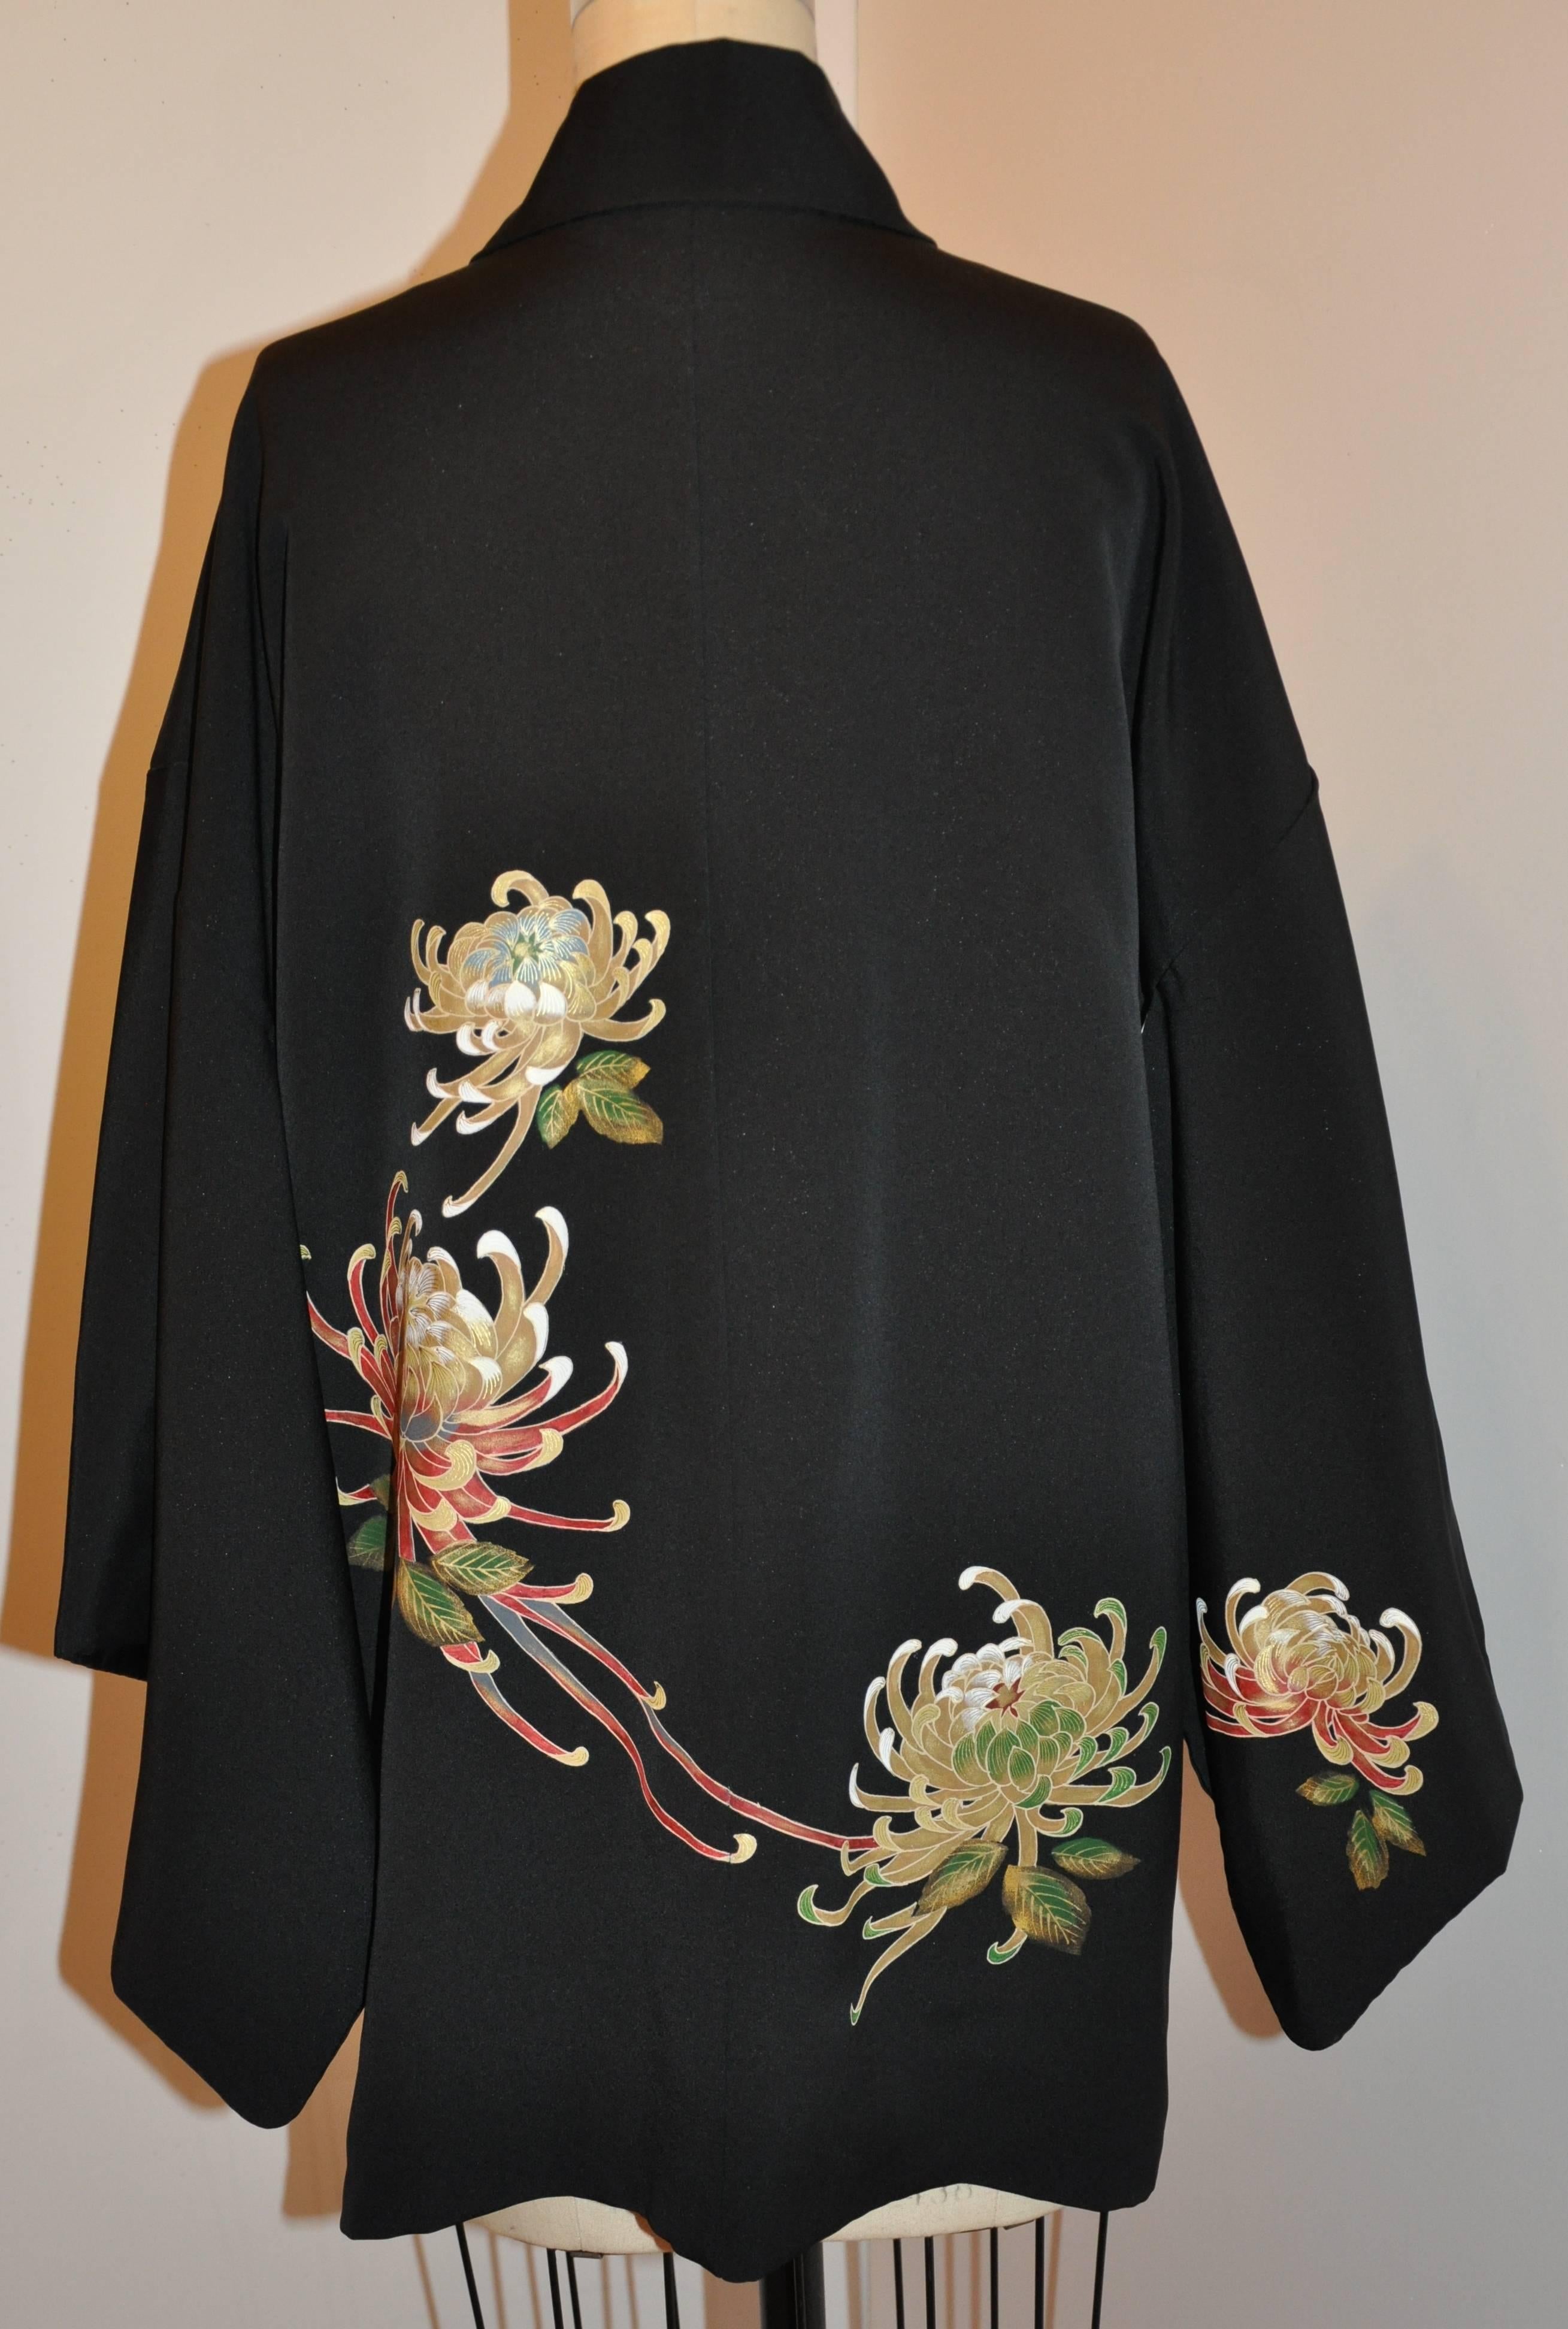        This wonderful fully hand-sewn Japanese black silk kimono jacket is detailed with hand-braided cord on the interior which is lined with prints of 